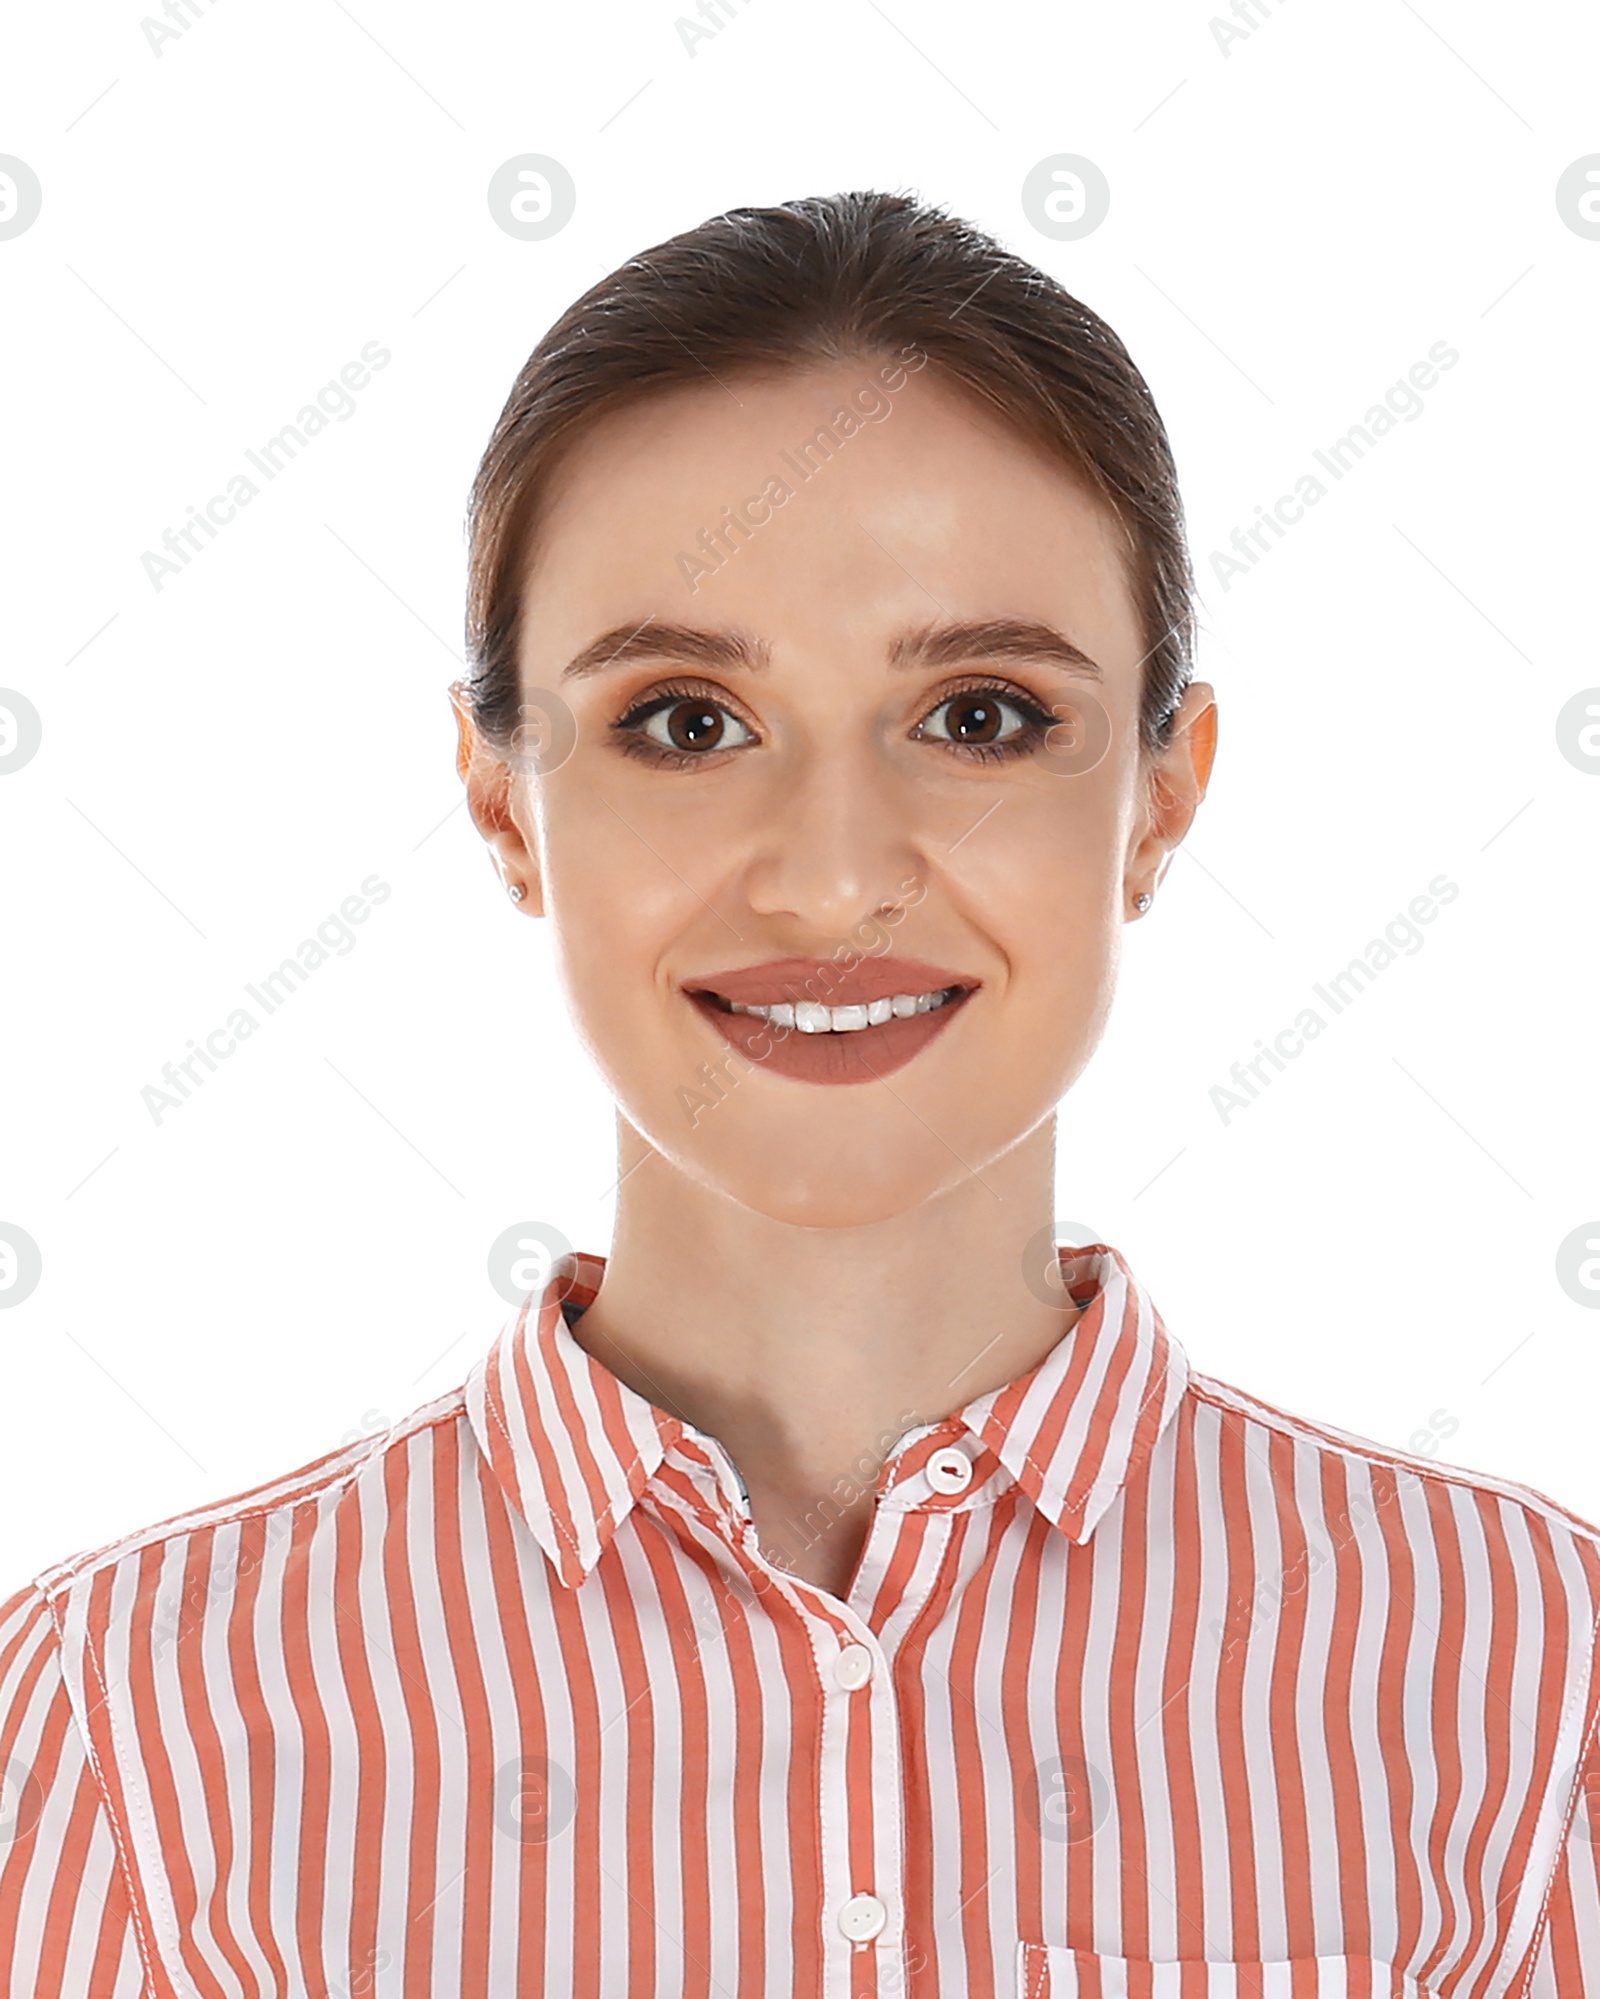 Image of Passport photo. Portrait of young woman on white background